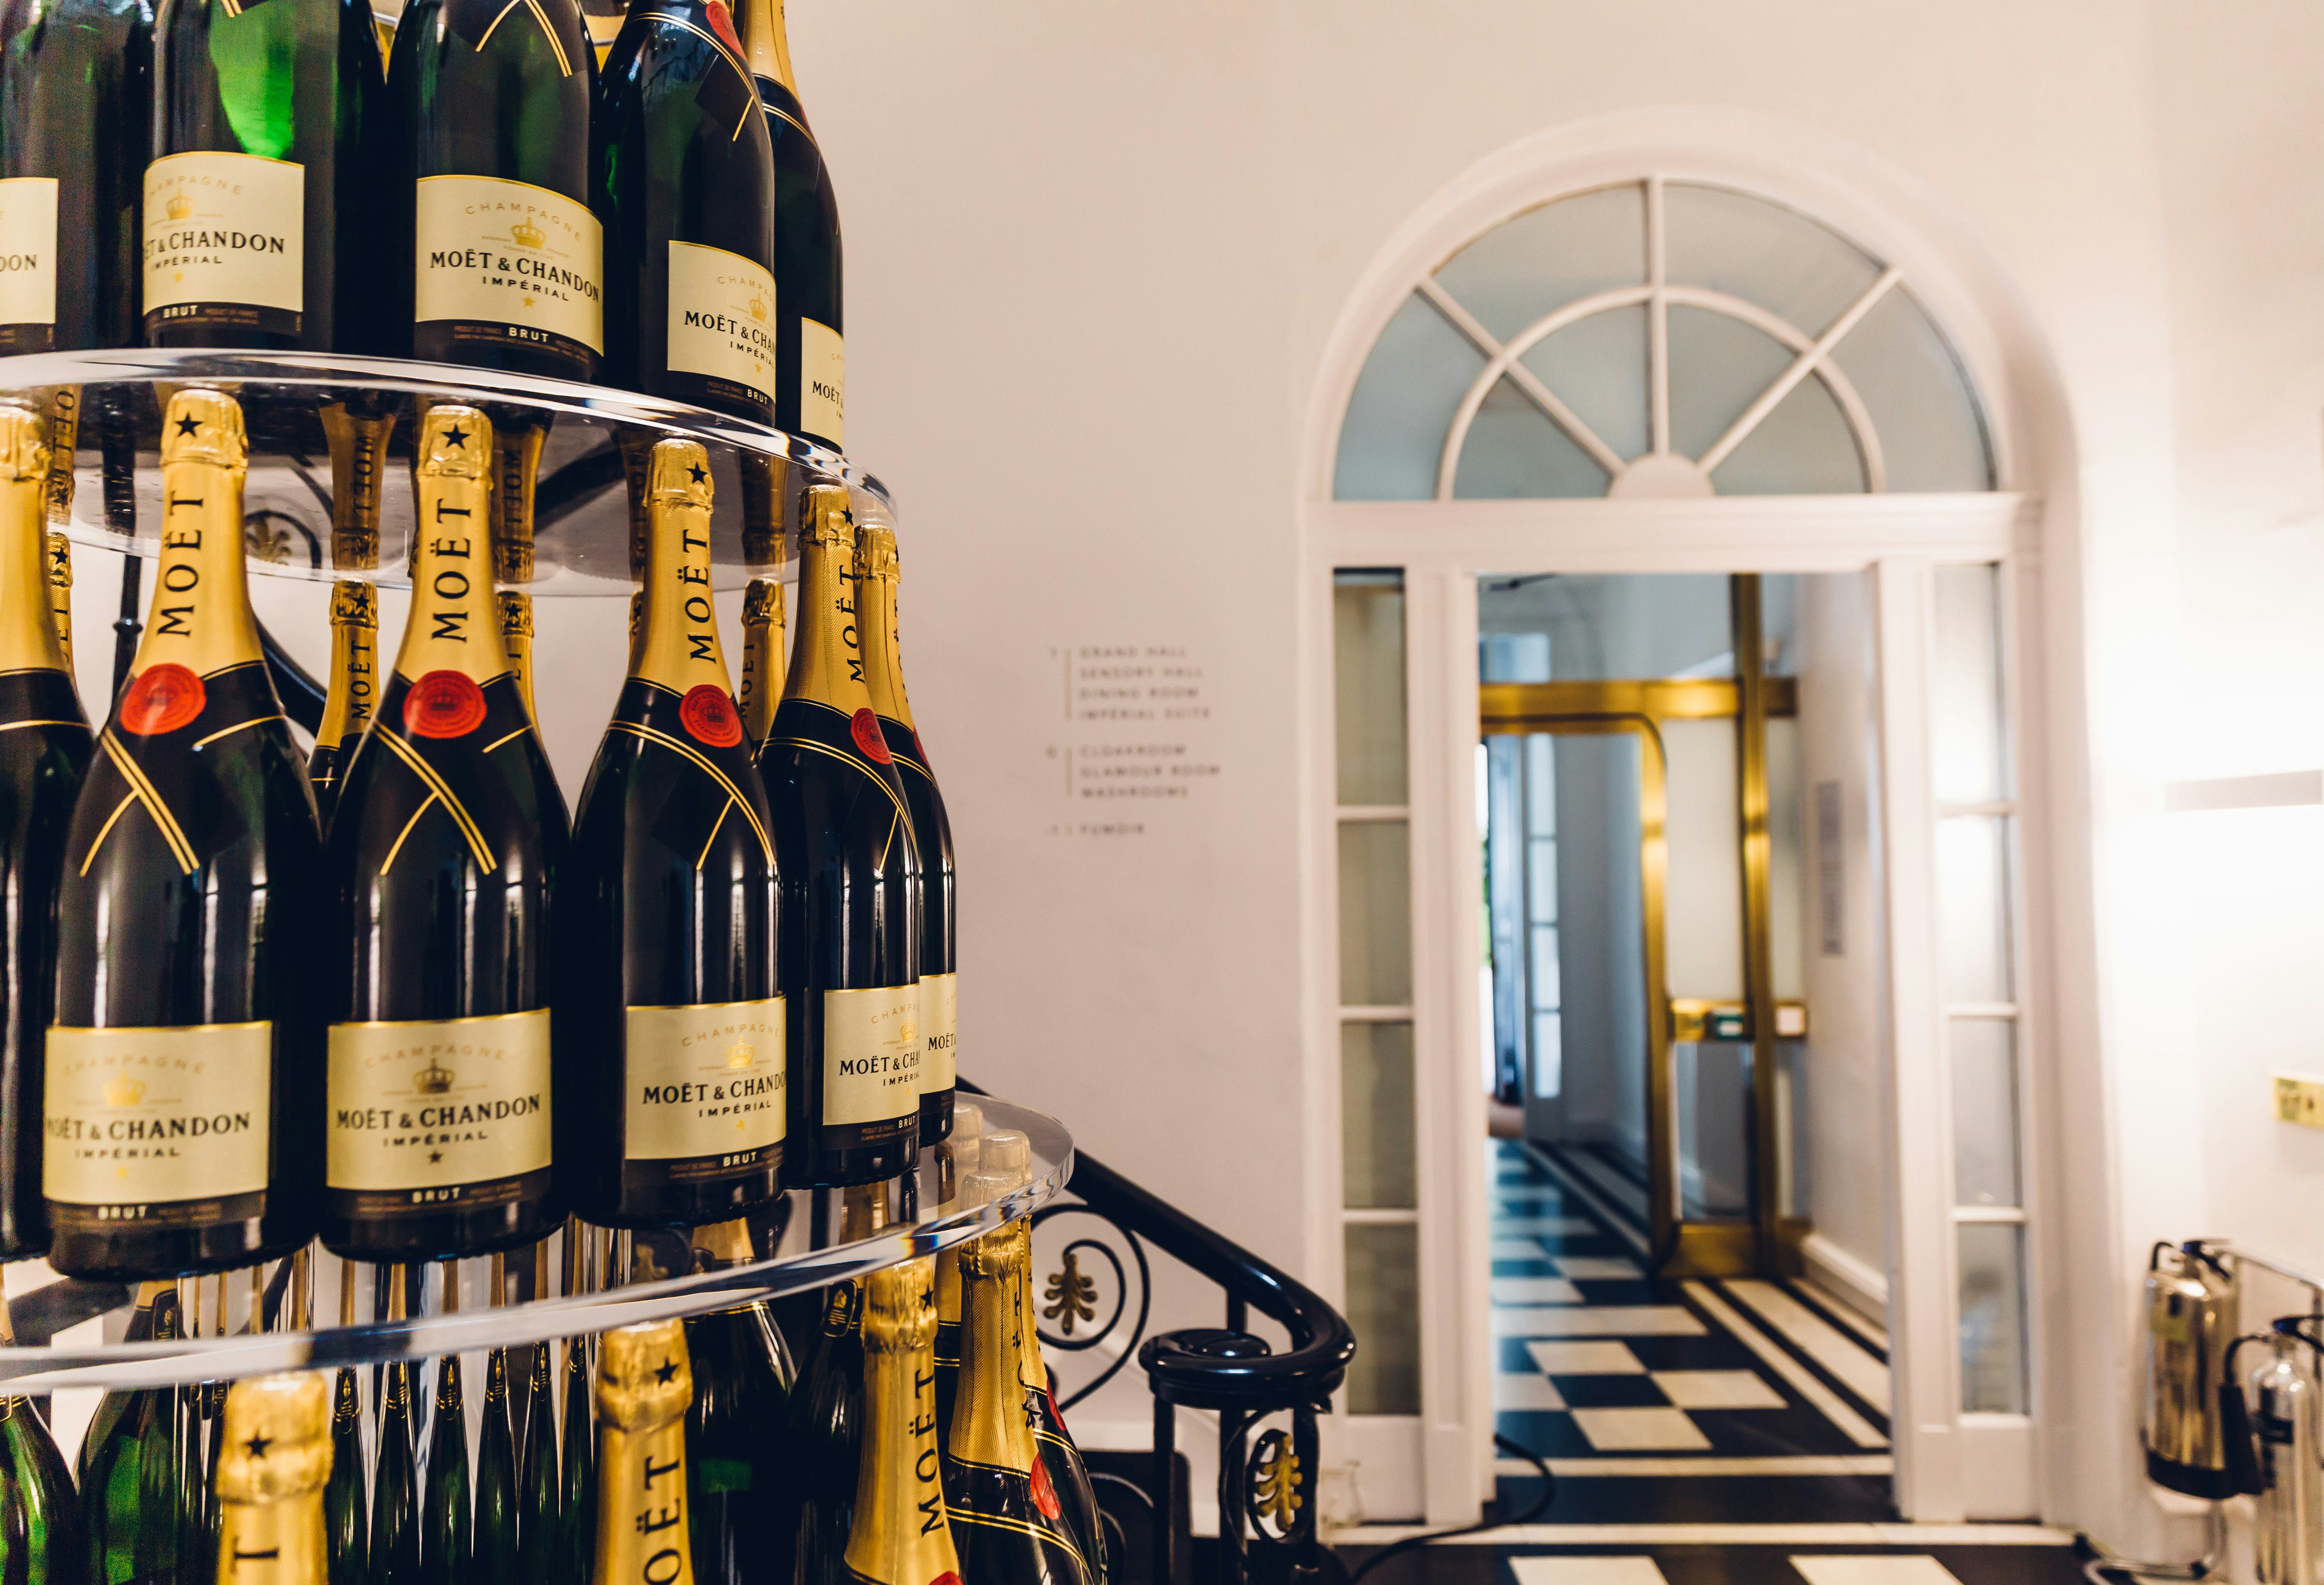 Moët & Chandon's Summer House opens its doors for 2019